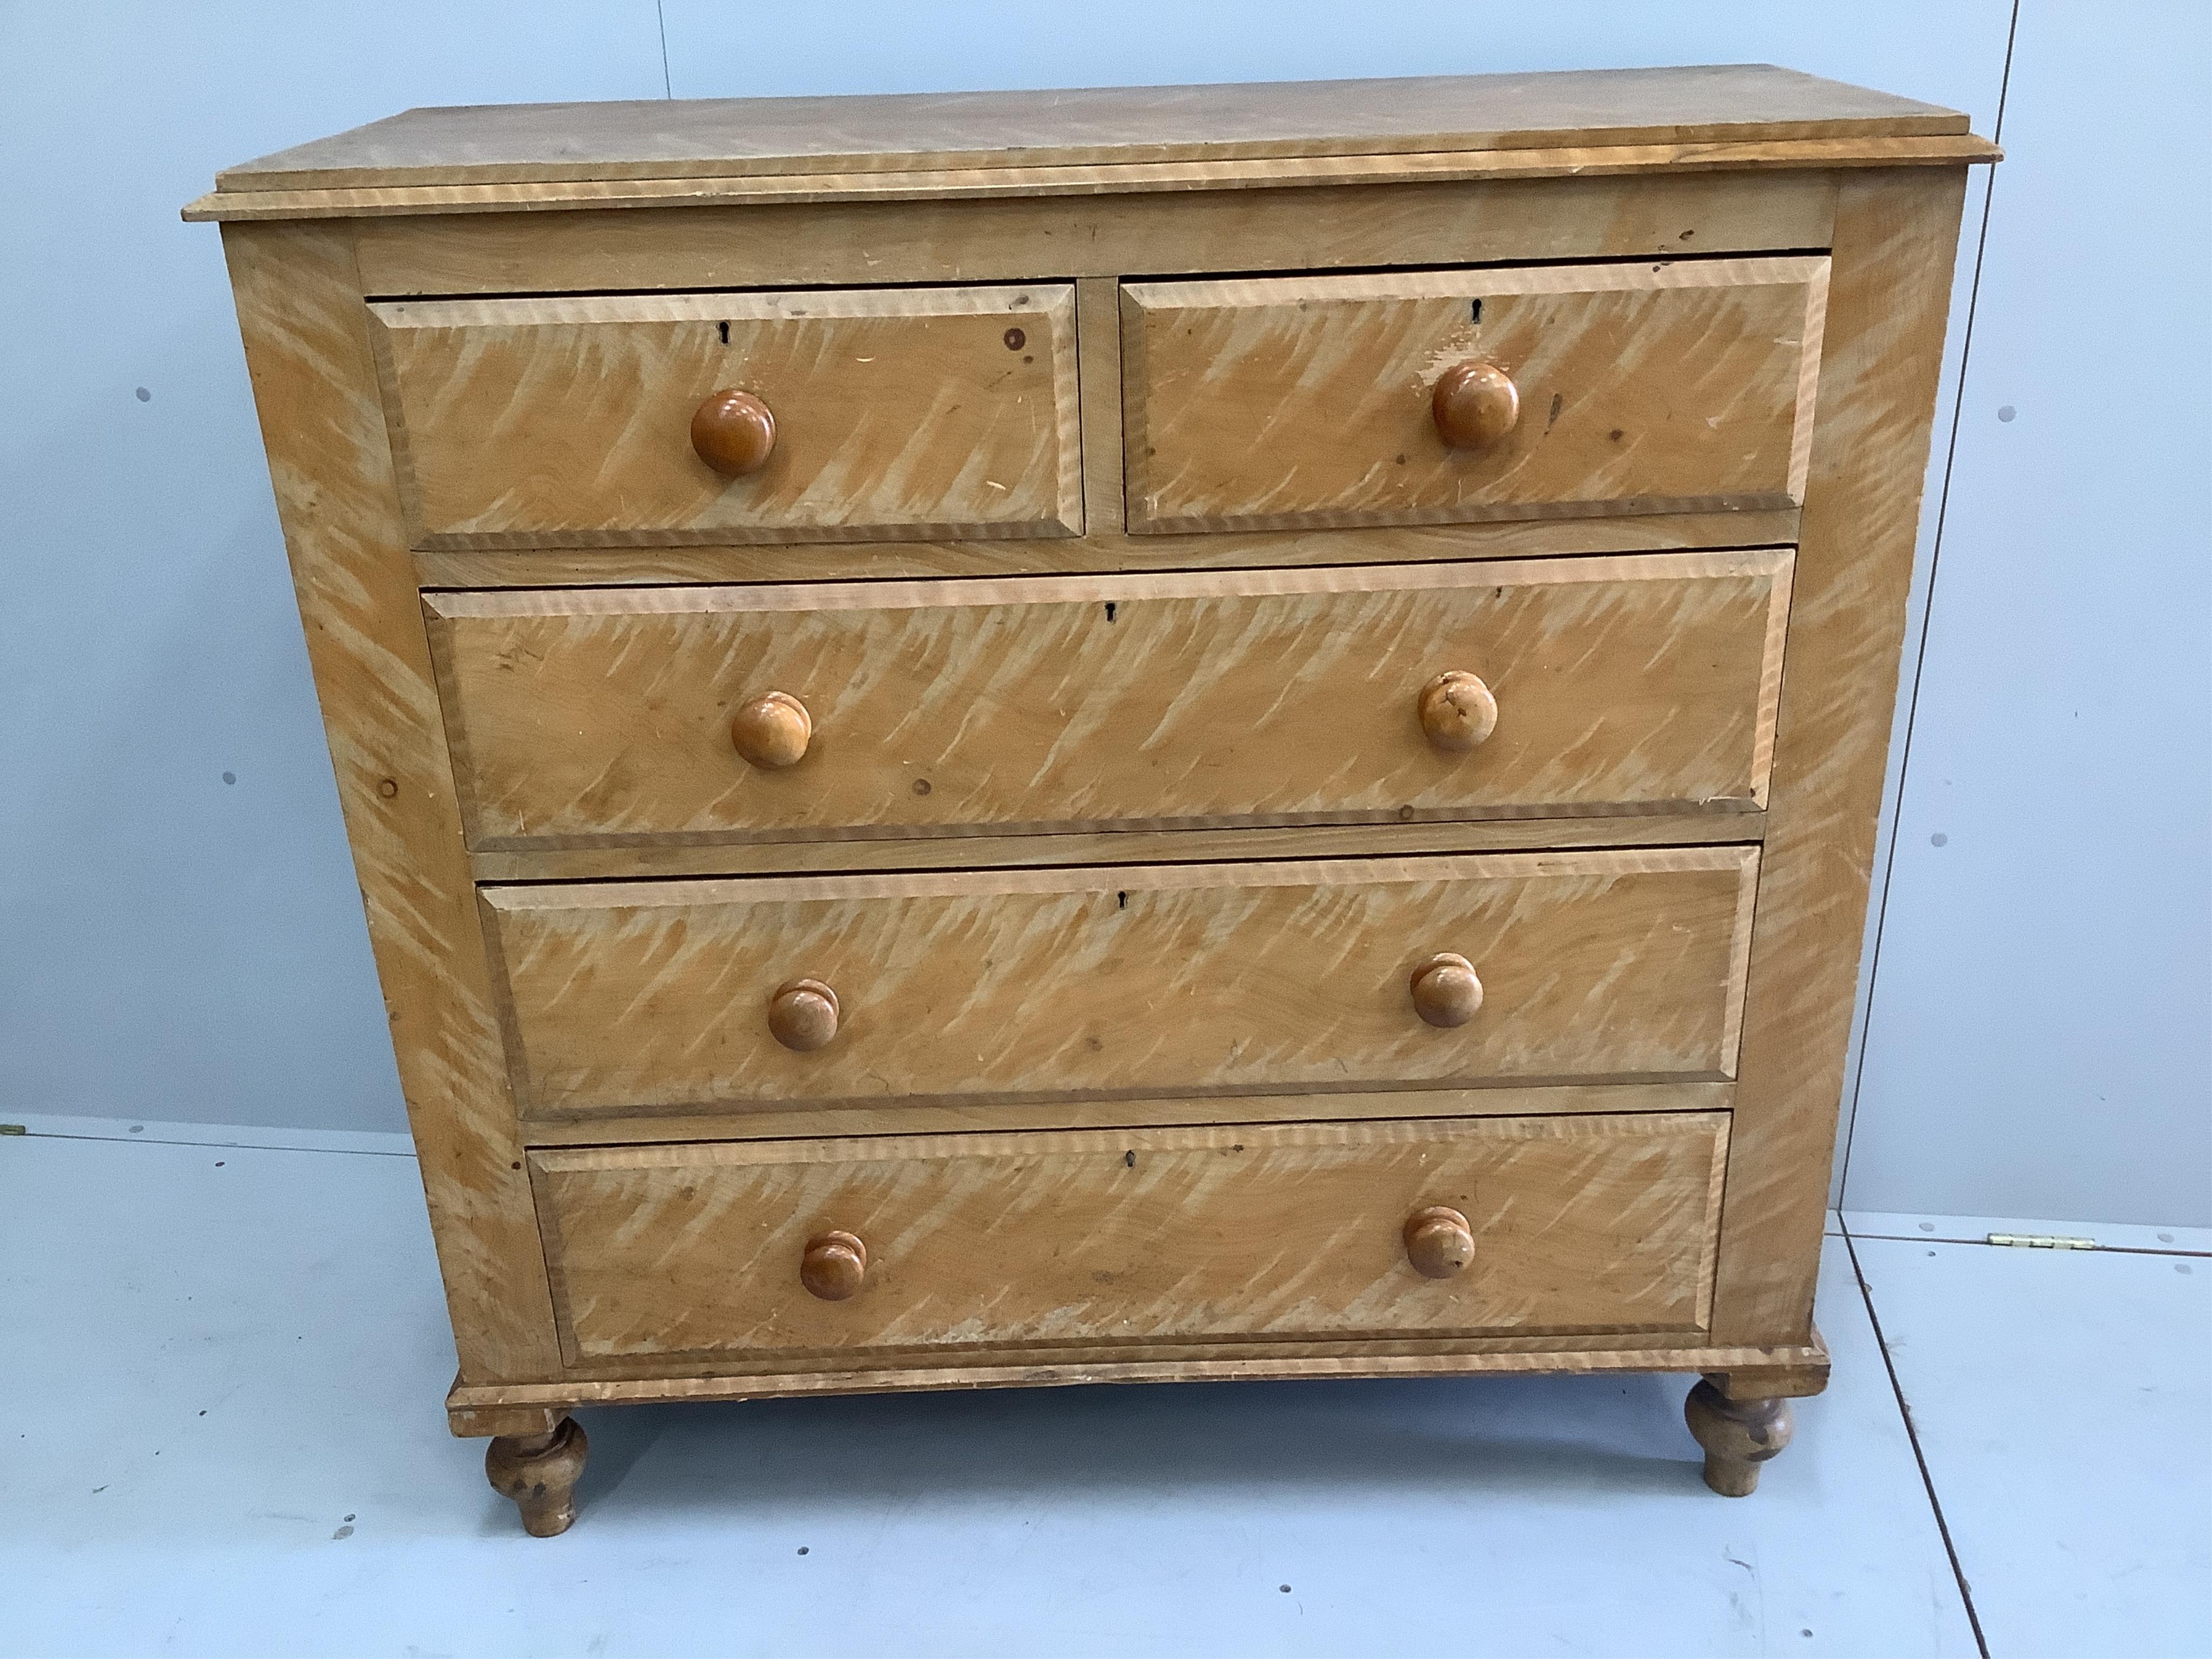 A late Victorian pine chest with painted simulated grain, width 119cm, depth 47cm, height 119cm. Condition - fair